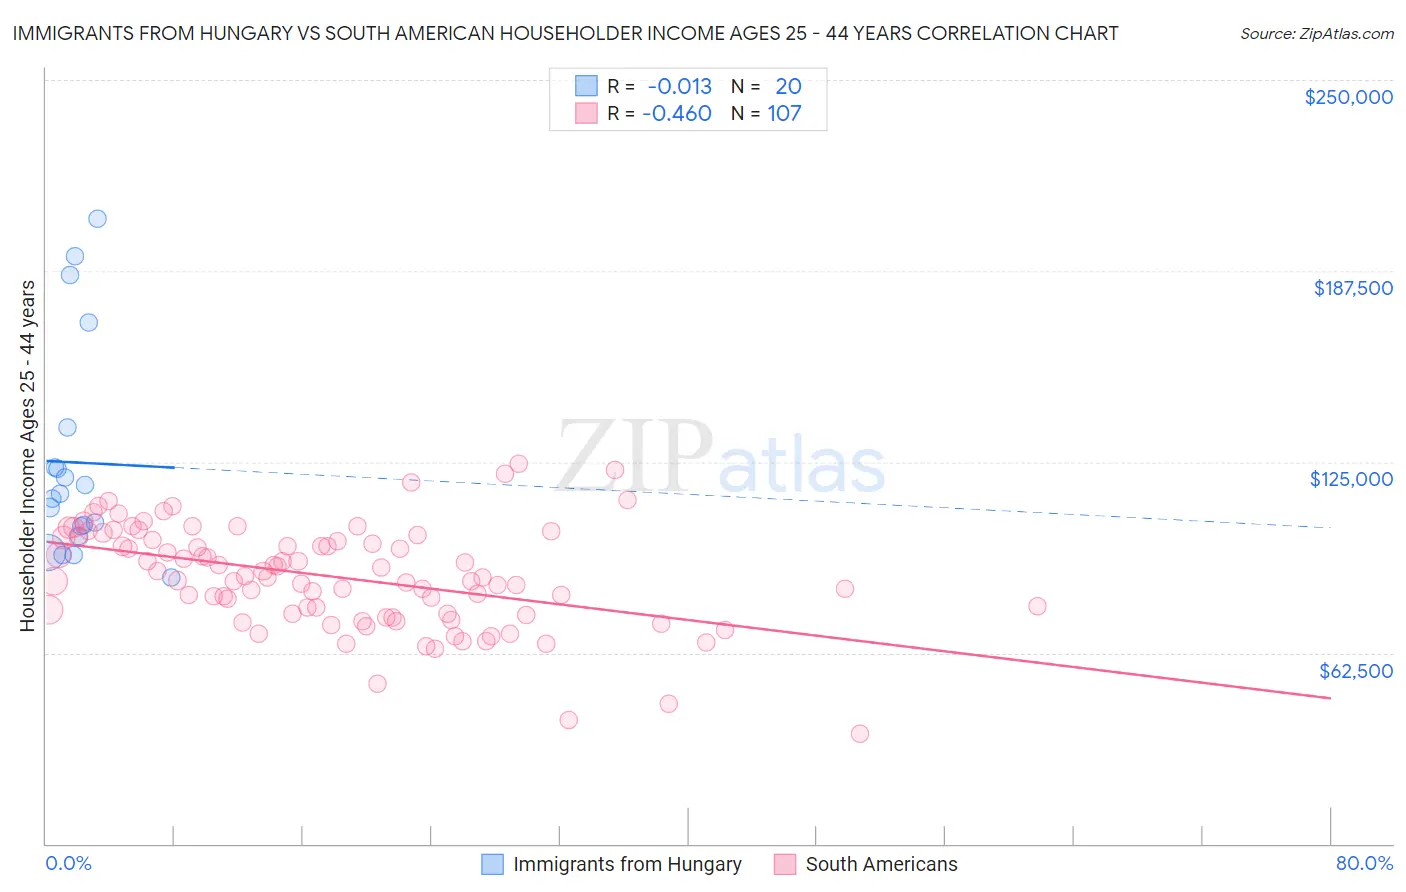 Immigrants from Hungary vs South American Householder Income Ages 25 - 44 years